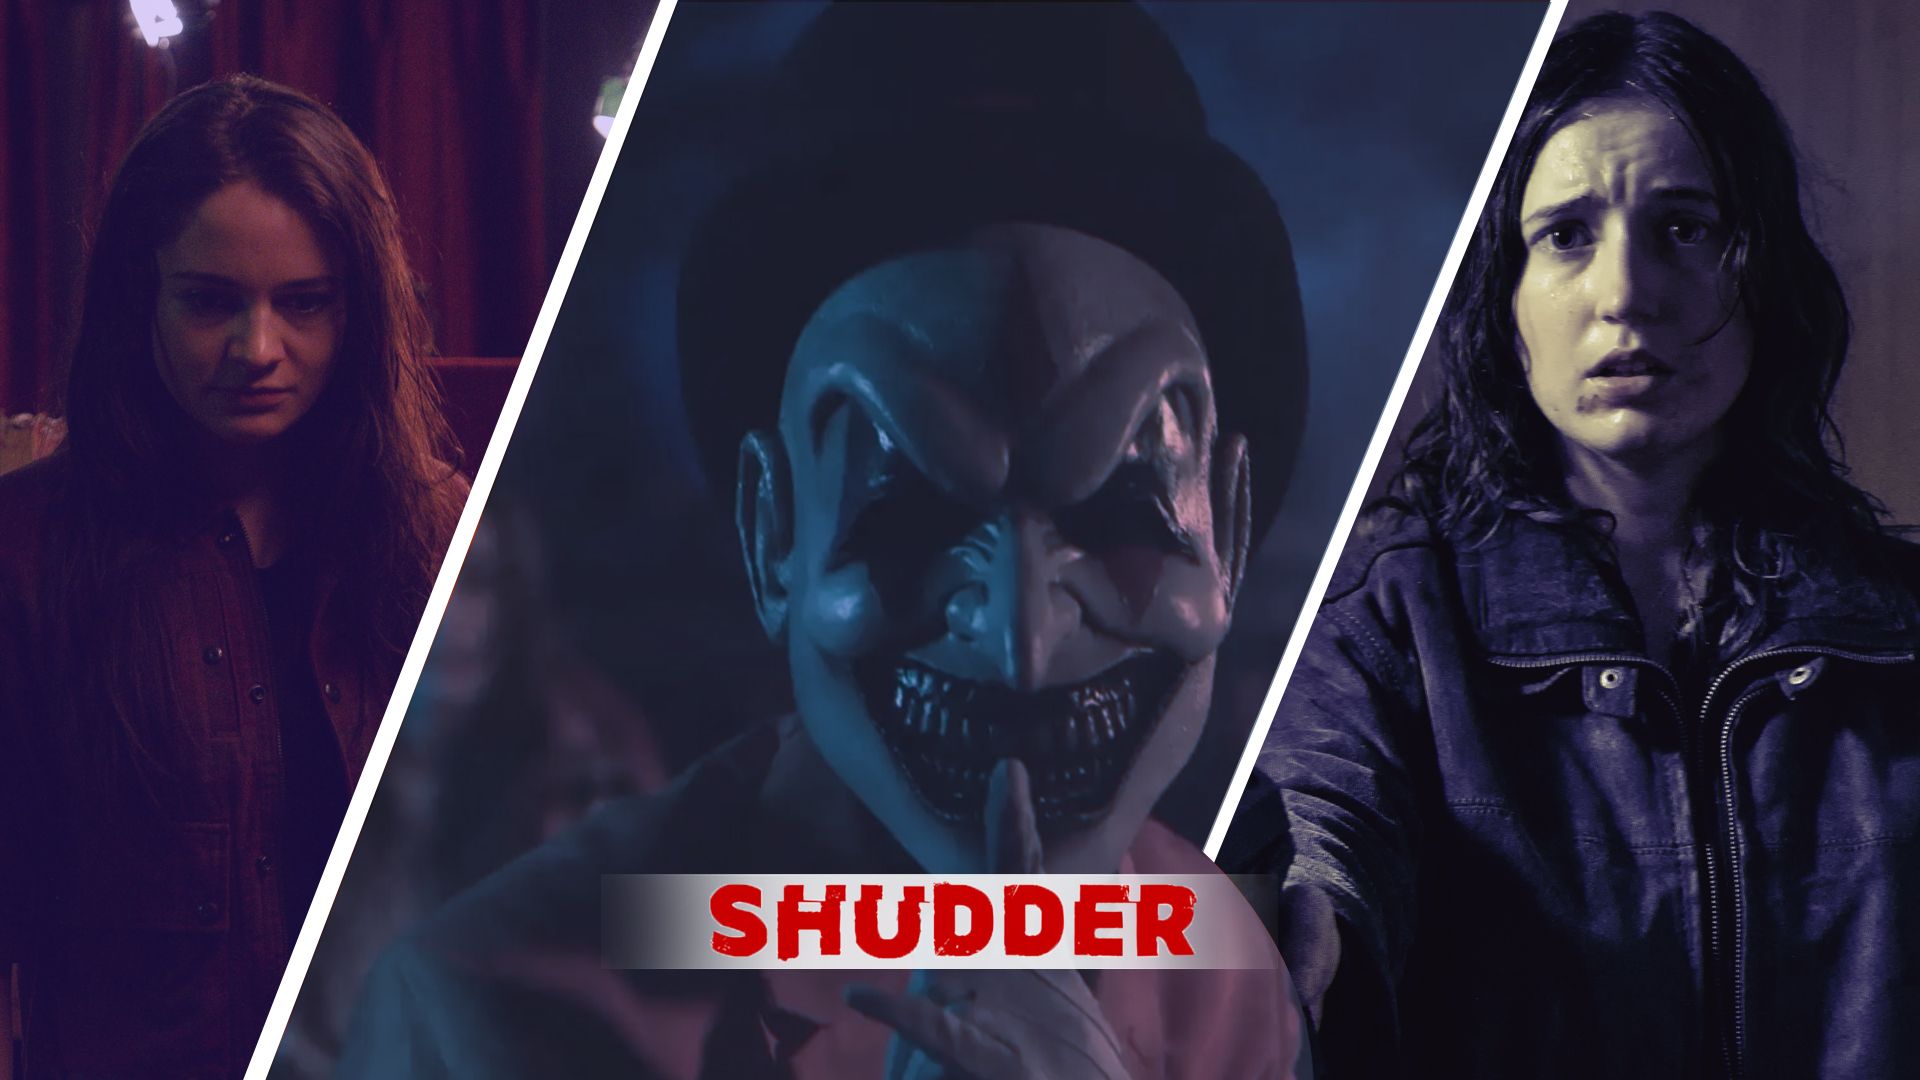 An edit of three movies with the Shudder logo including Stopmotion, The Jester, and Nightwatch: Demons are Forever